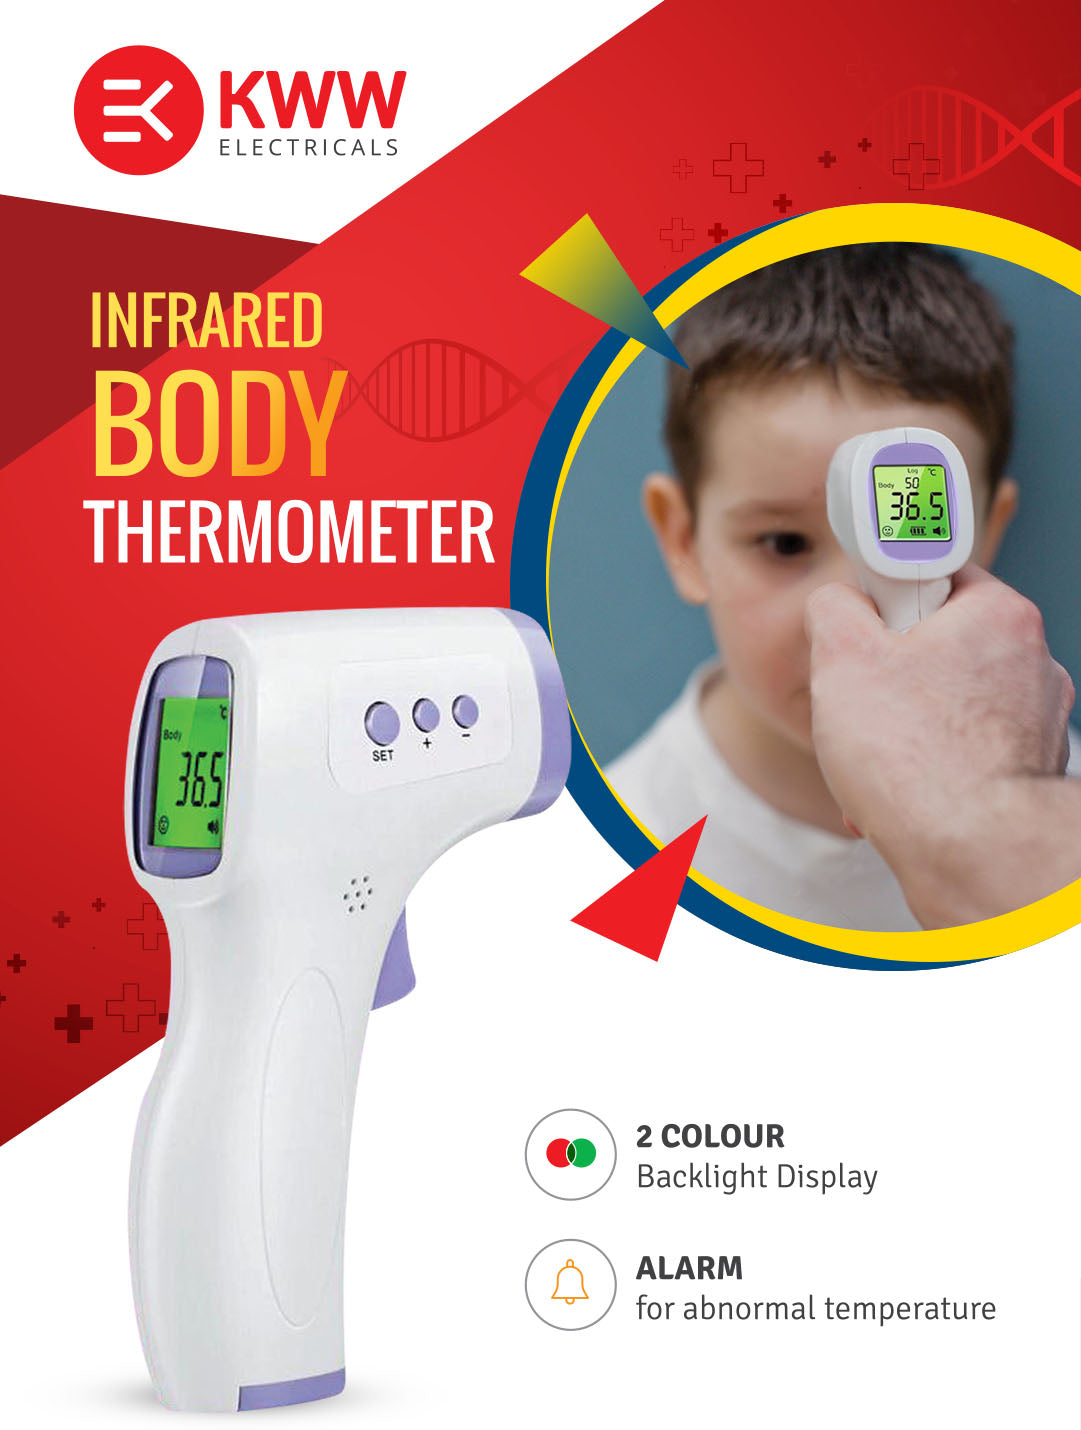 KWW Electricals Infrared Thermometer